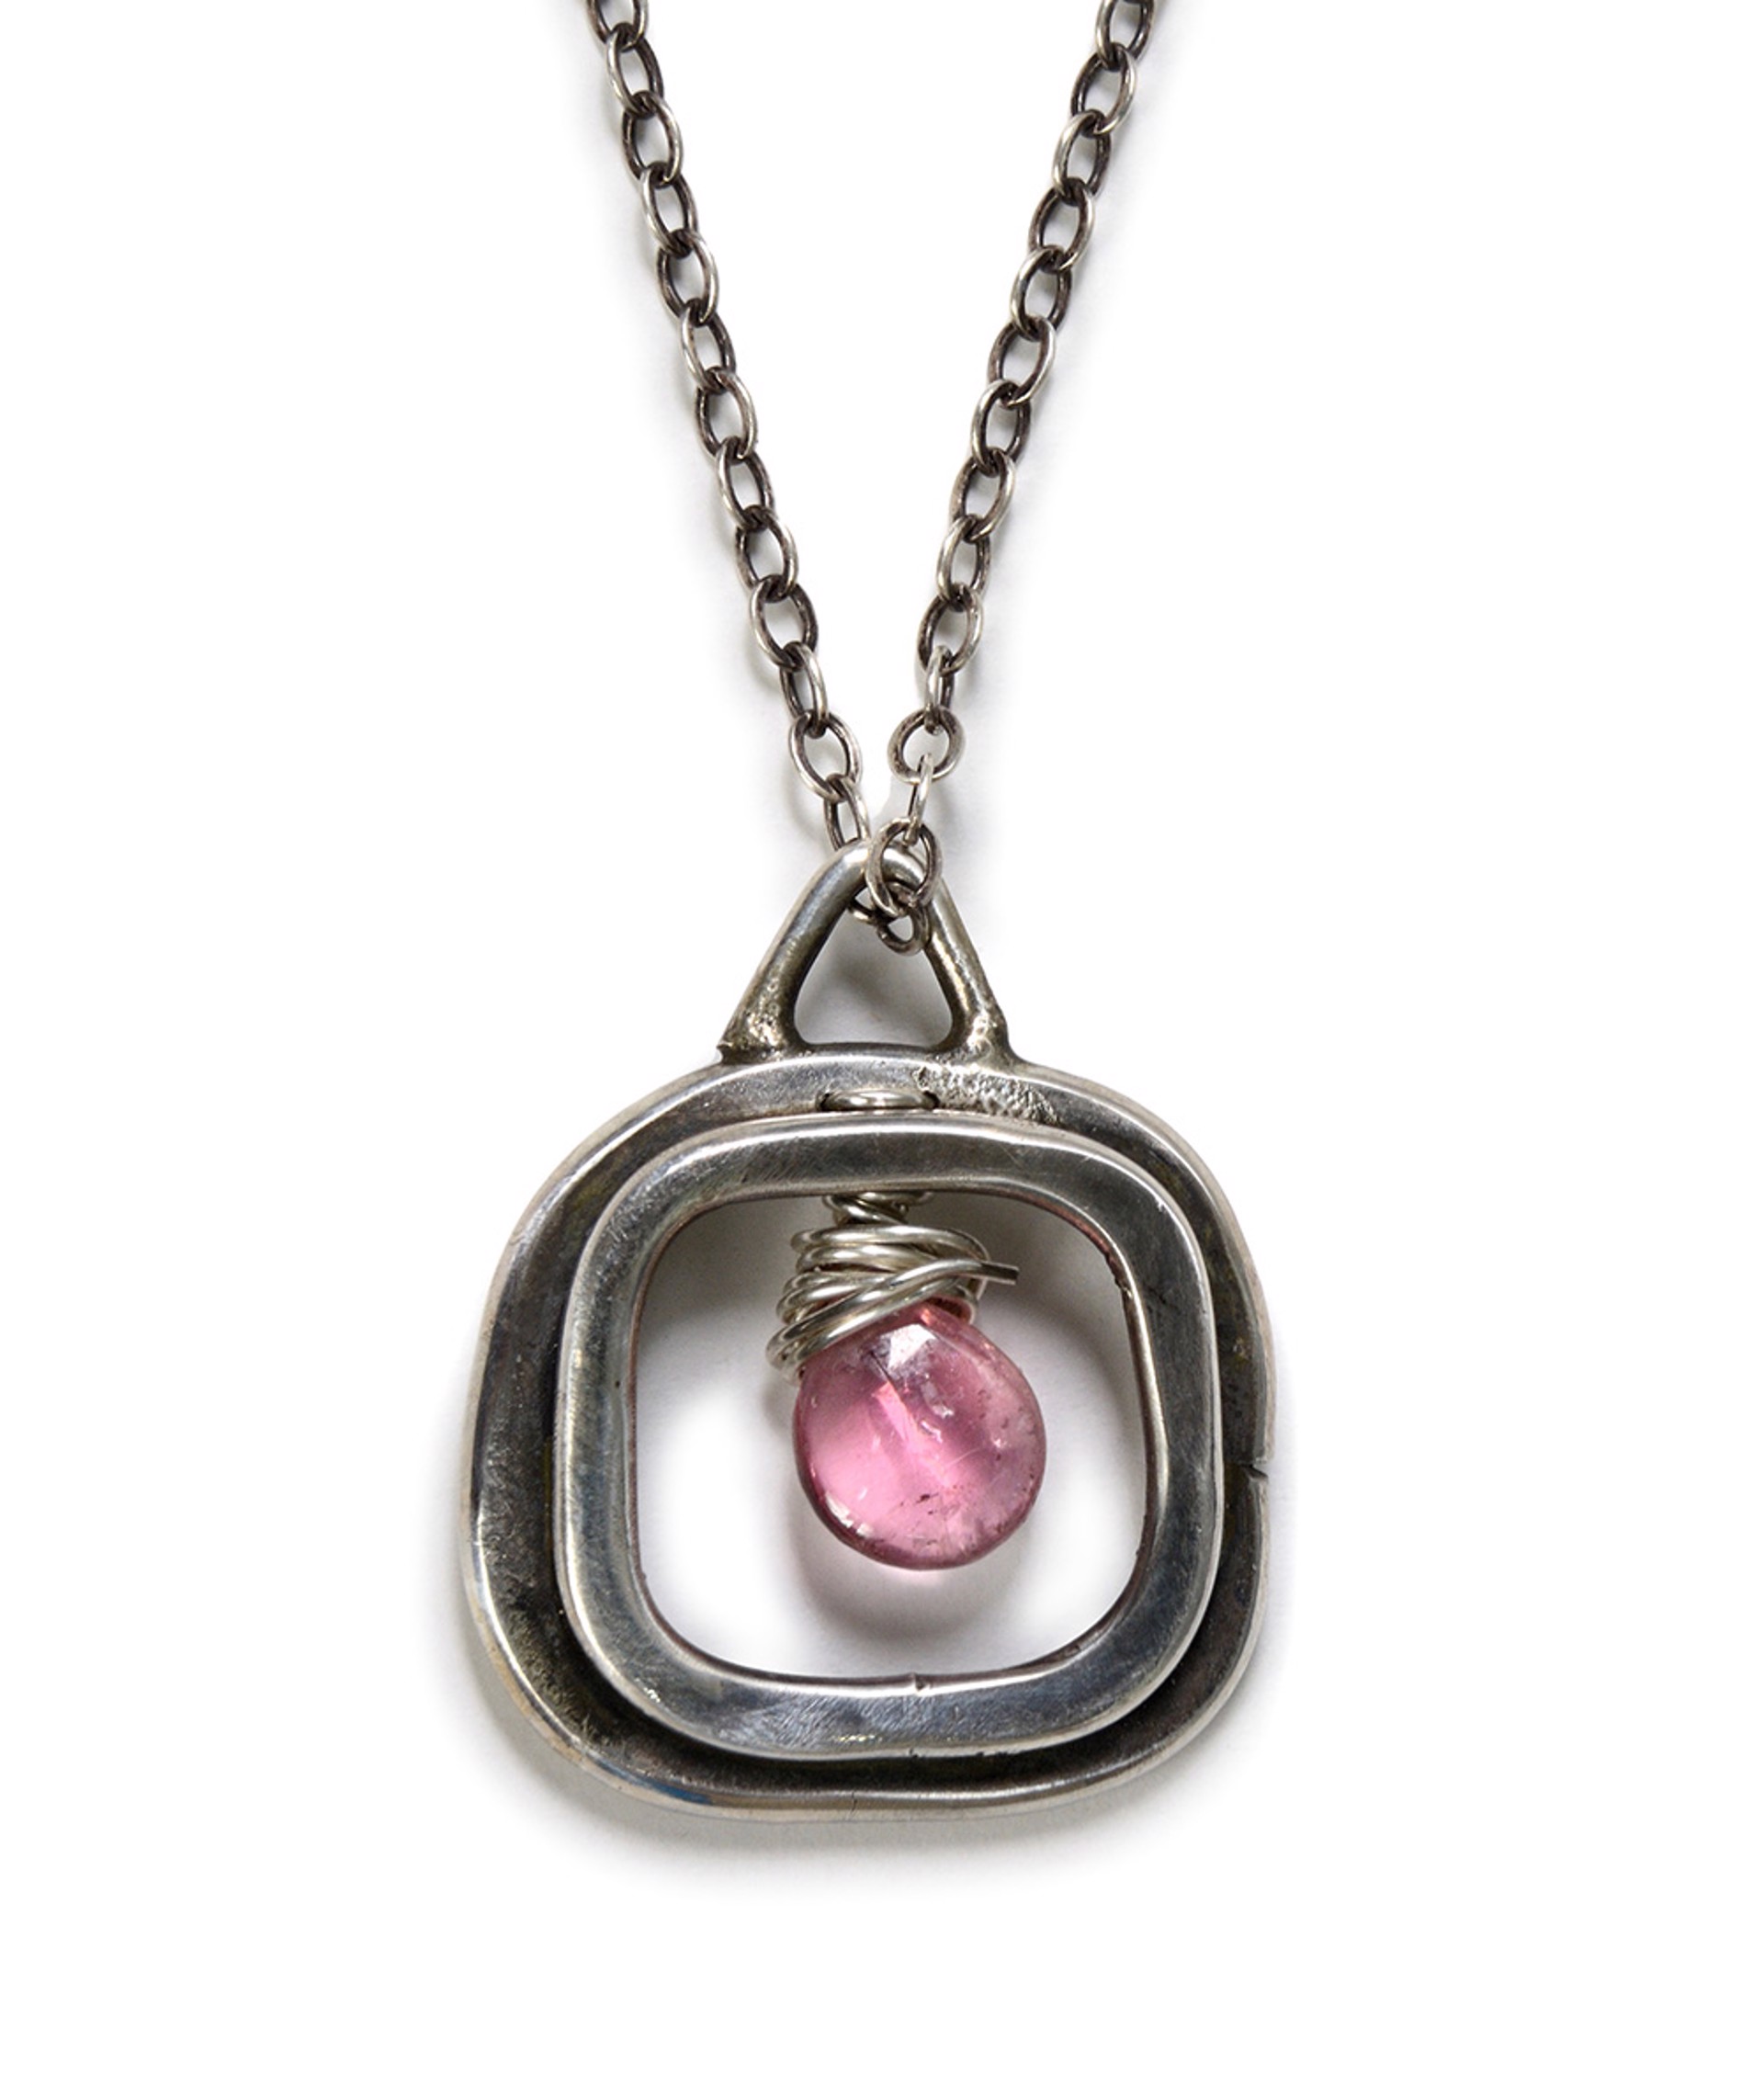 Window Necklace with Pink Tourmaline by Beth Aimee